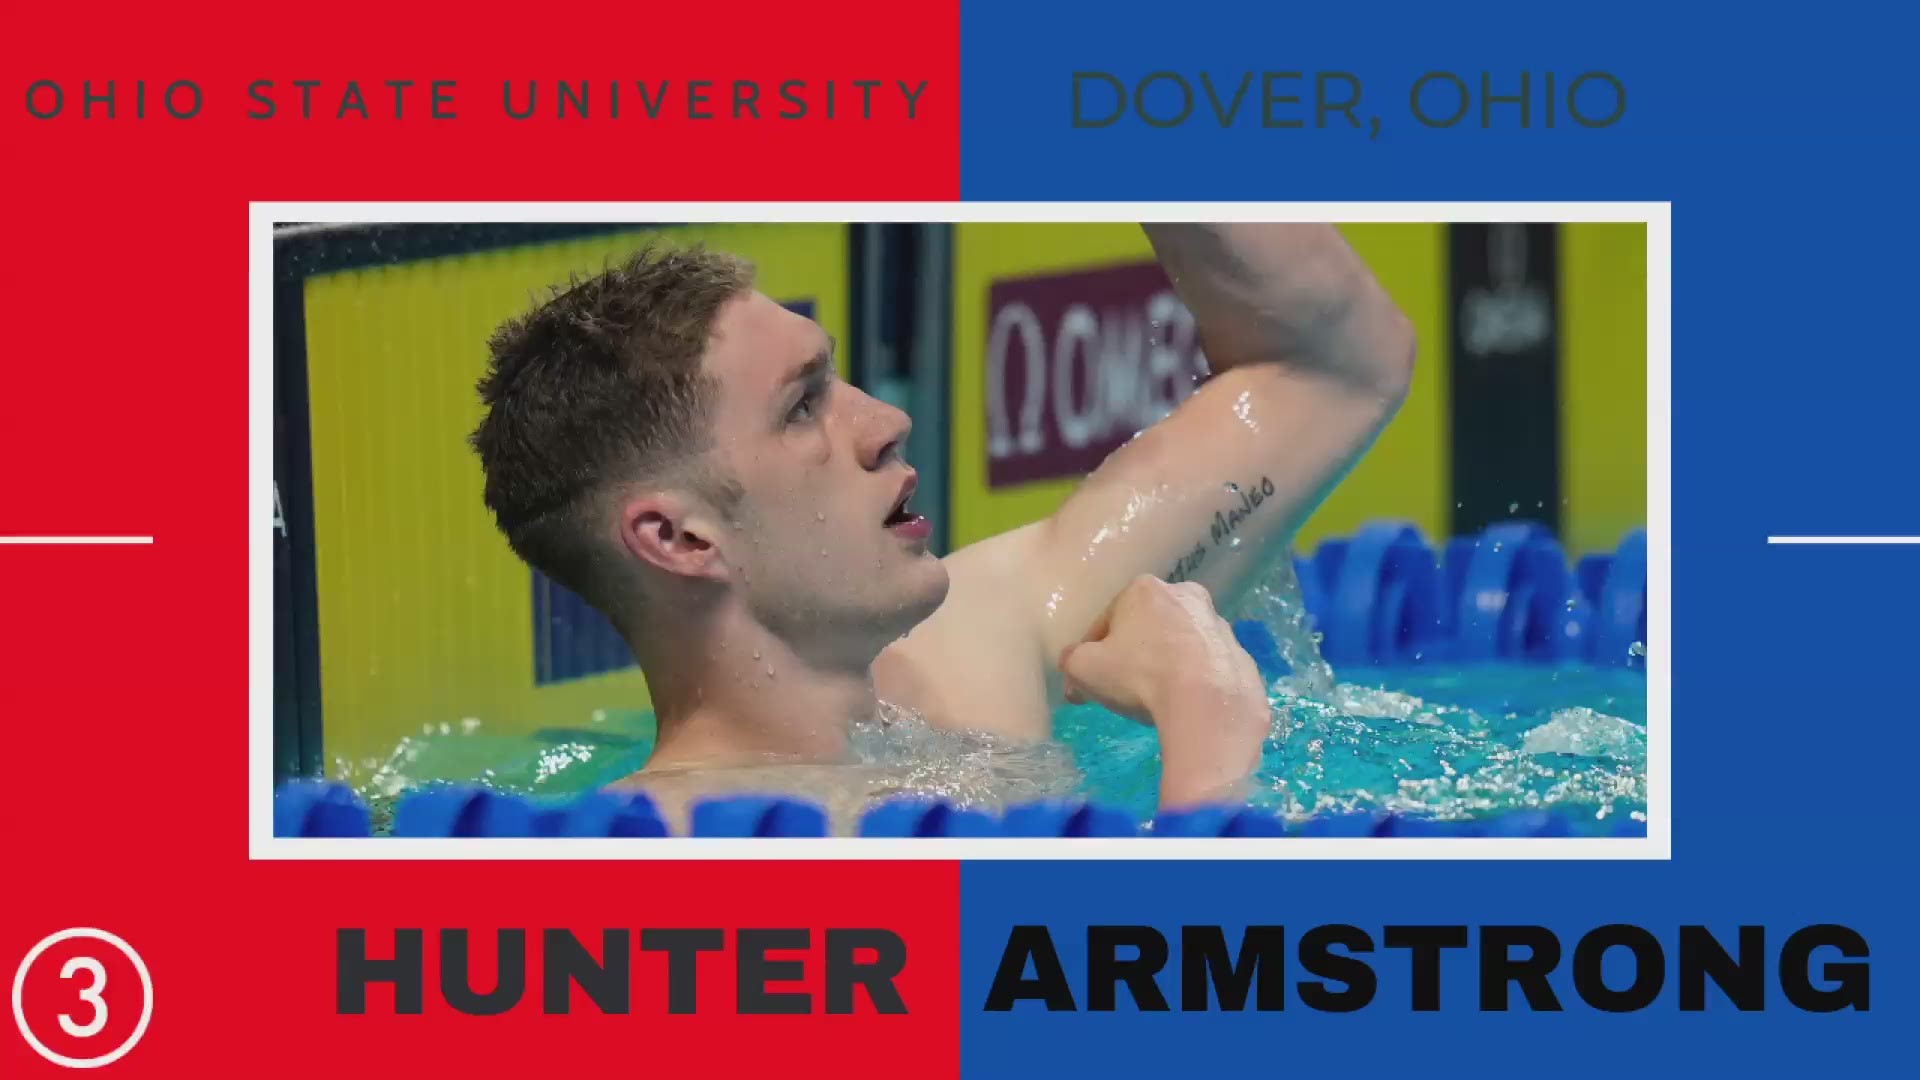 Armstrong is the first Ohio State male swimmer to make the U.S. Olympic swimming team in 65 years.